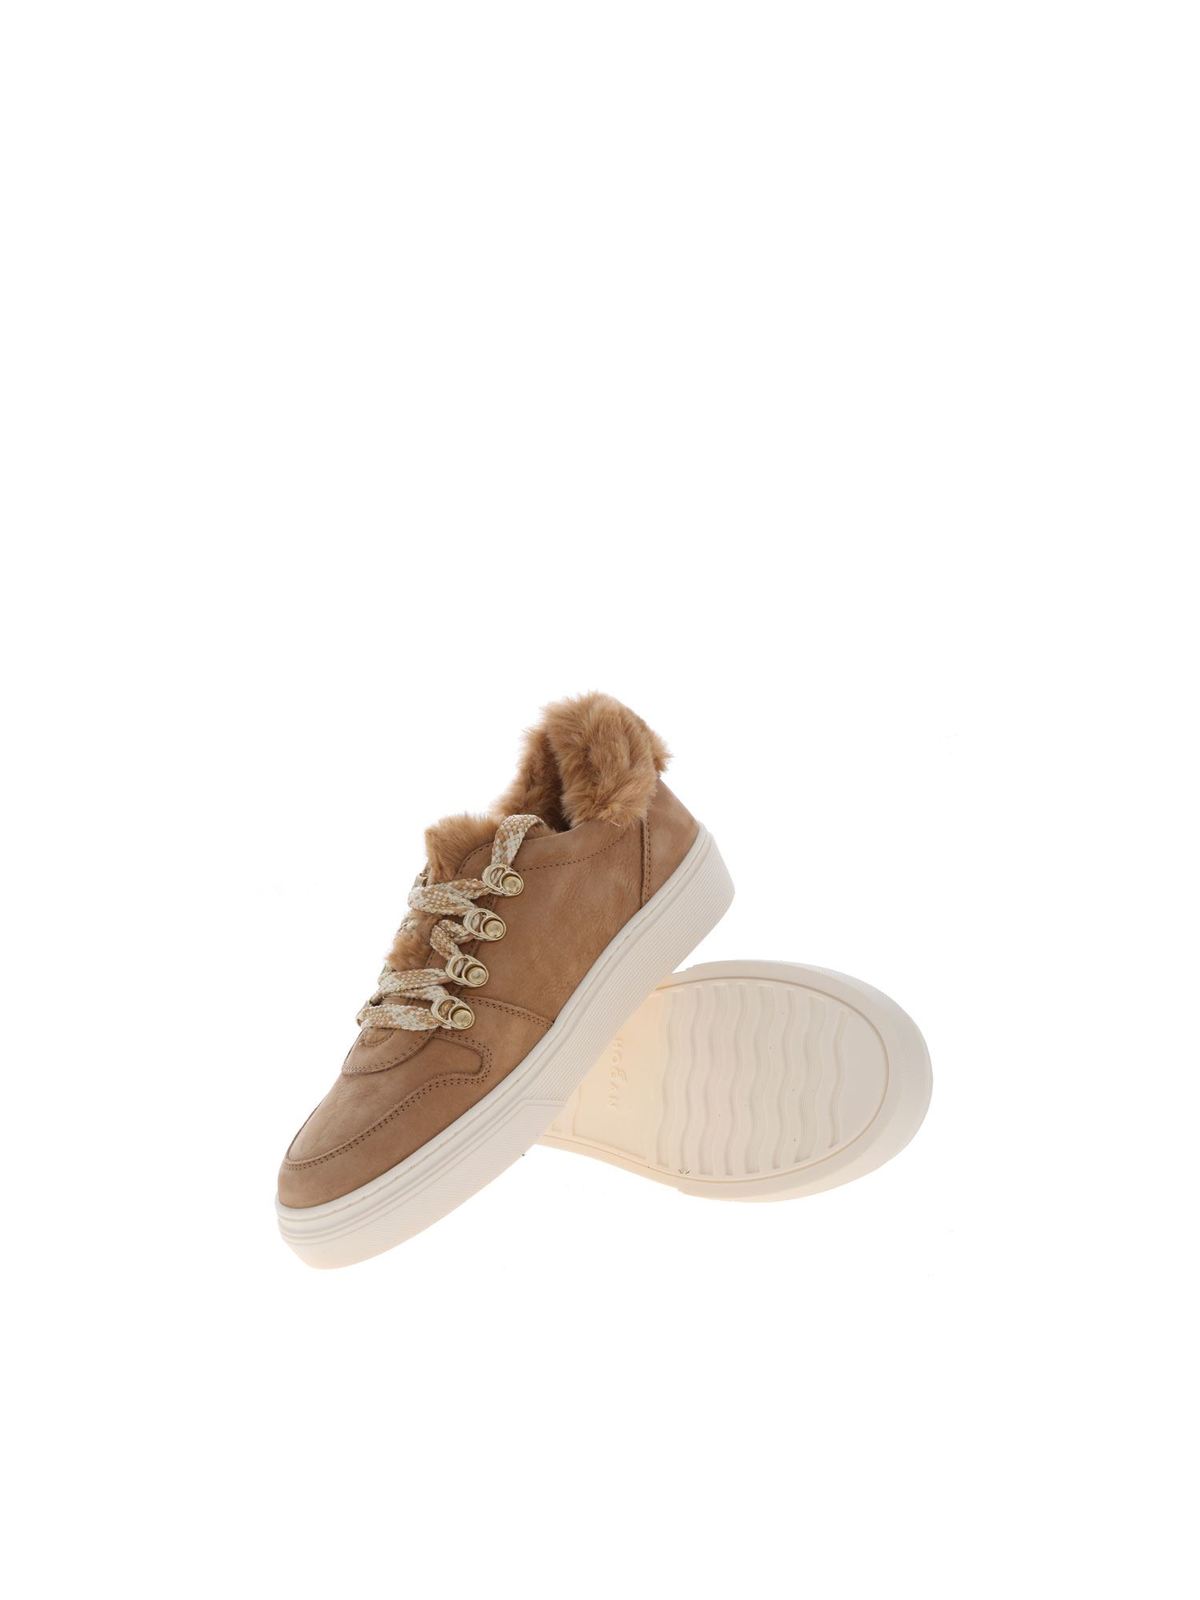 camel colored slip on sneakers